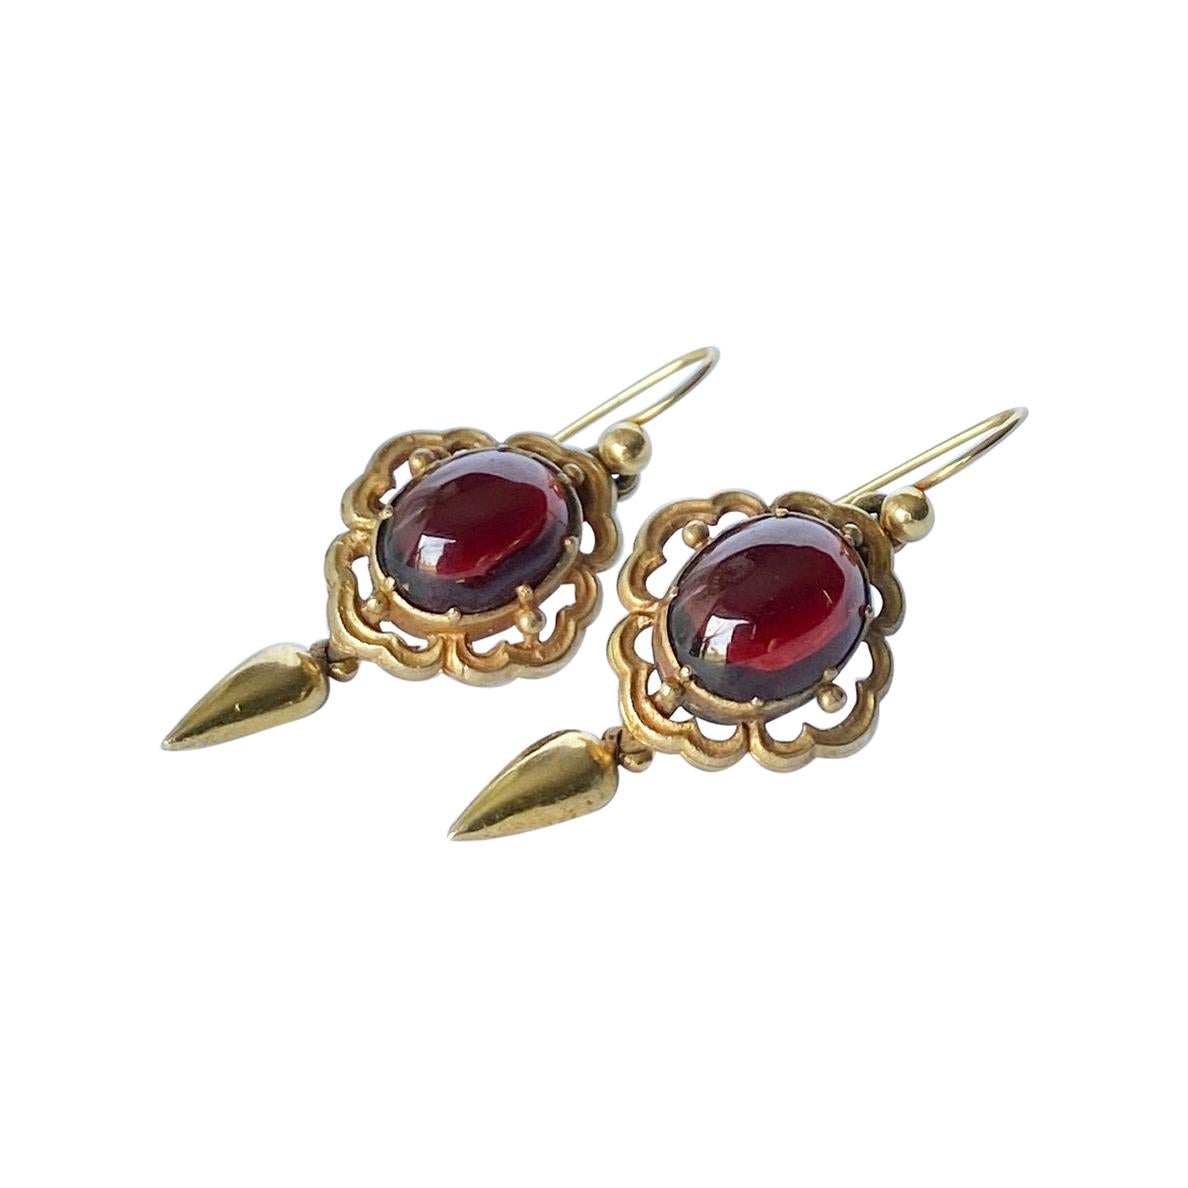 Antique Garnet Cabochon and 9 Carat Gold Stud Earrings